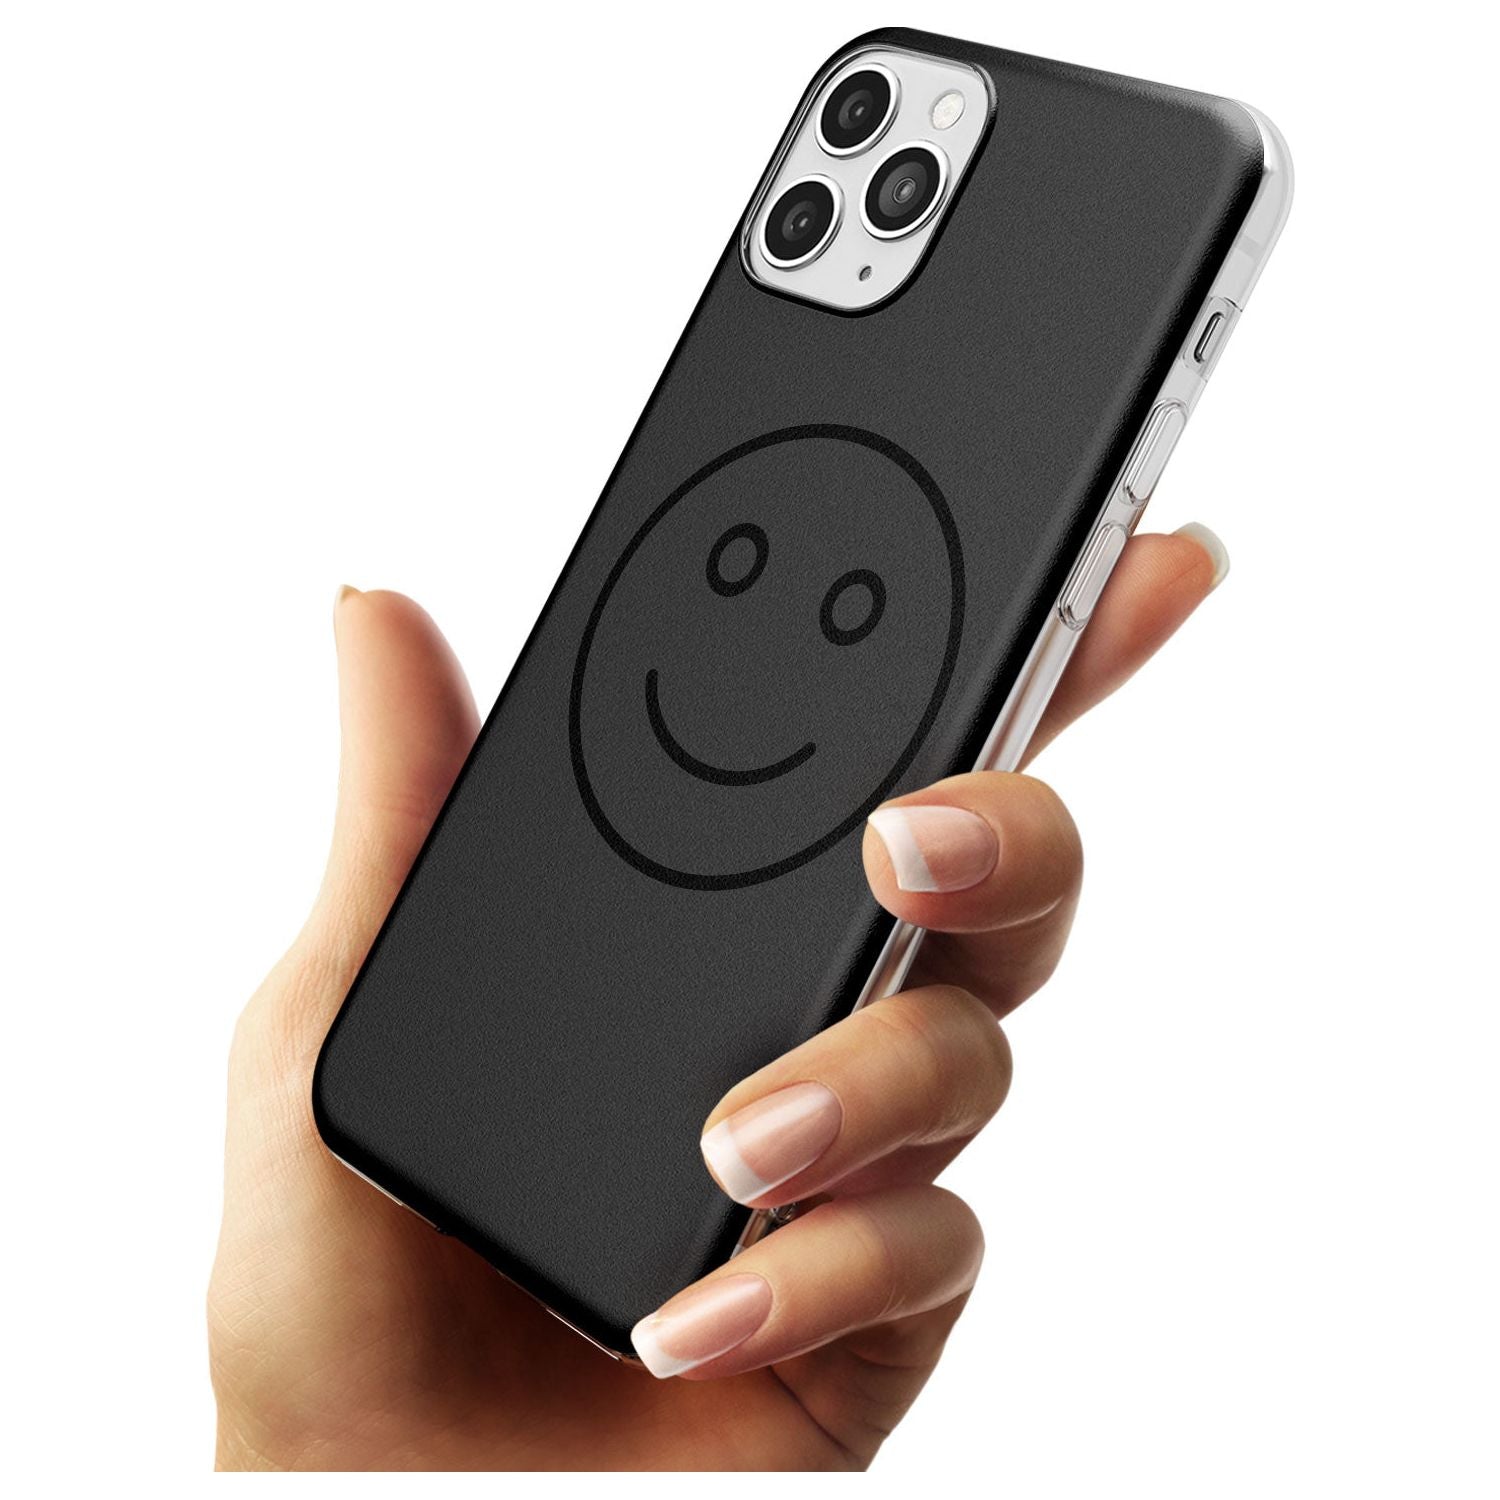 Dark Smiley Face Slim TPU Phone Case for iPhone 11 Pro Max